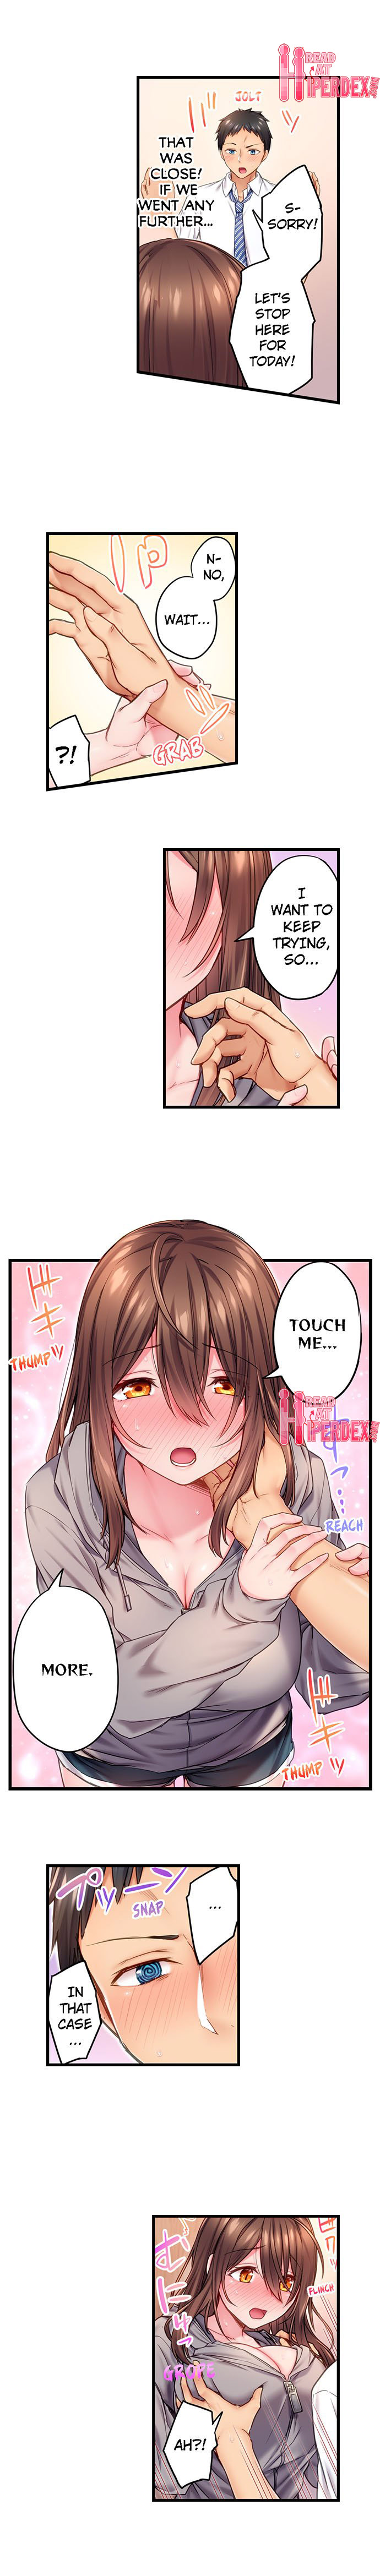 Can’t Believe My Loner Childhood Friend Became This Sexy Girl - Chapter 2 Page 9